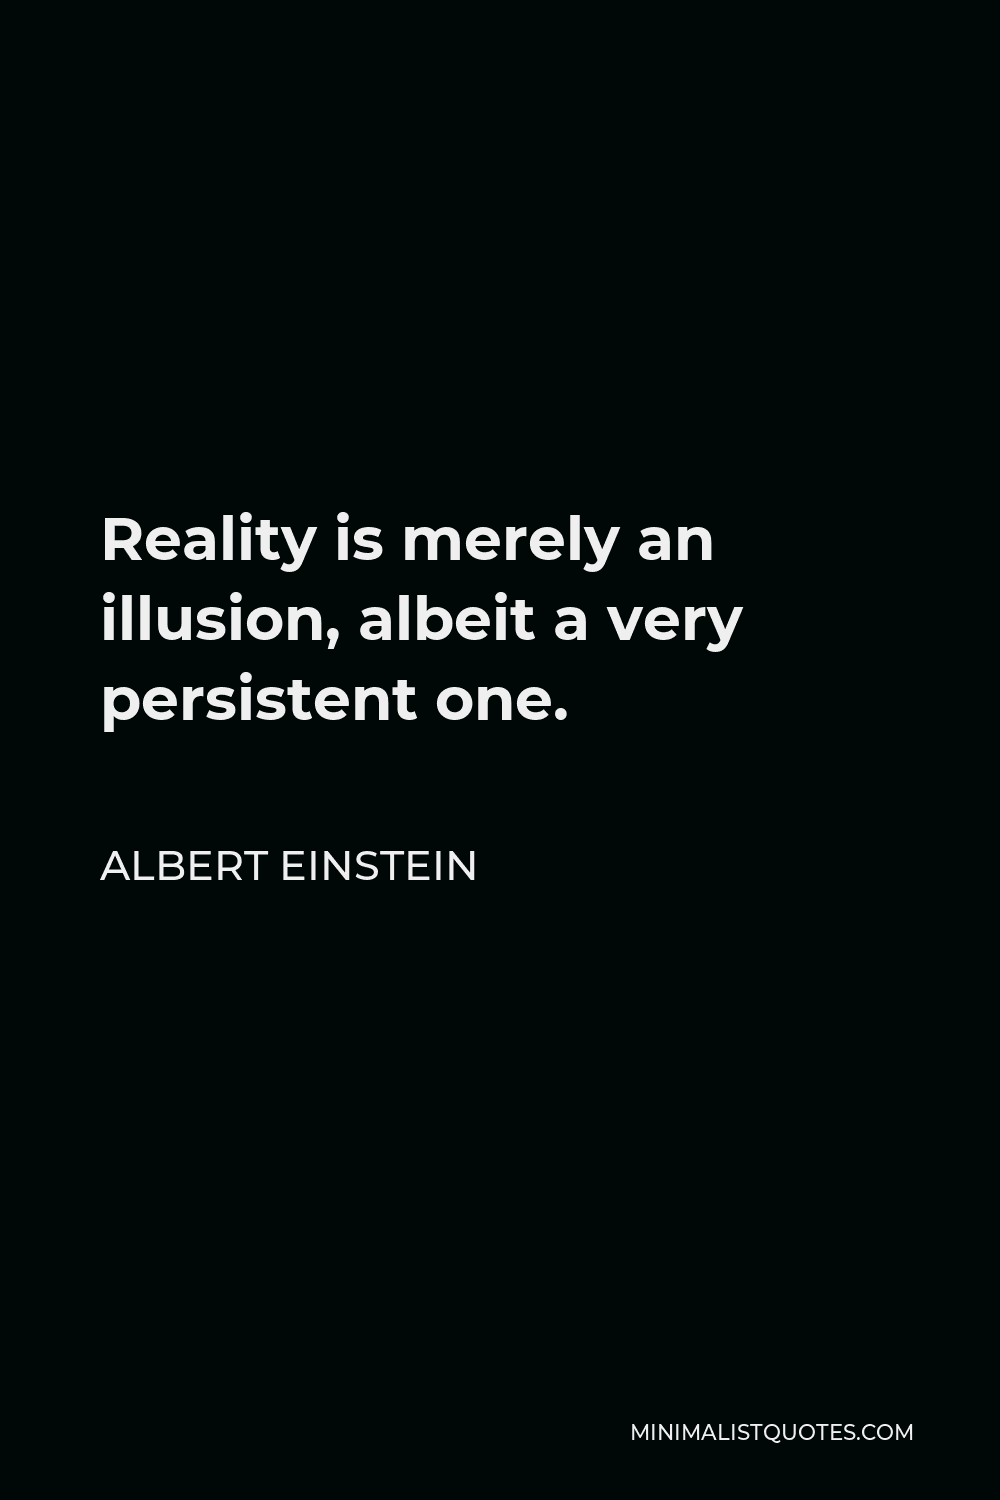 Albert Einstein Quote - Reality is merely an illusion, albeit a very persistent one.